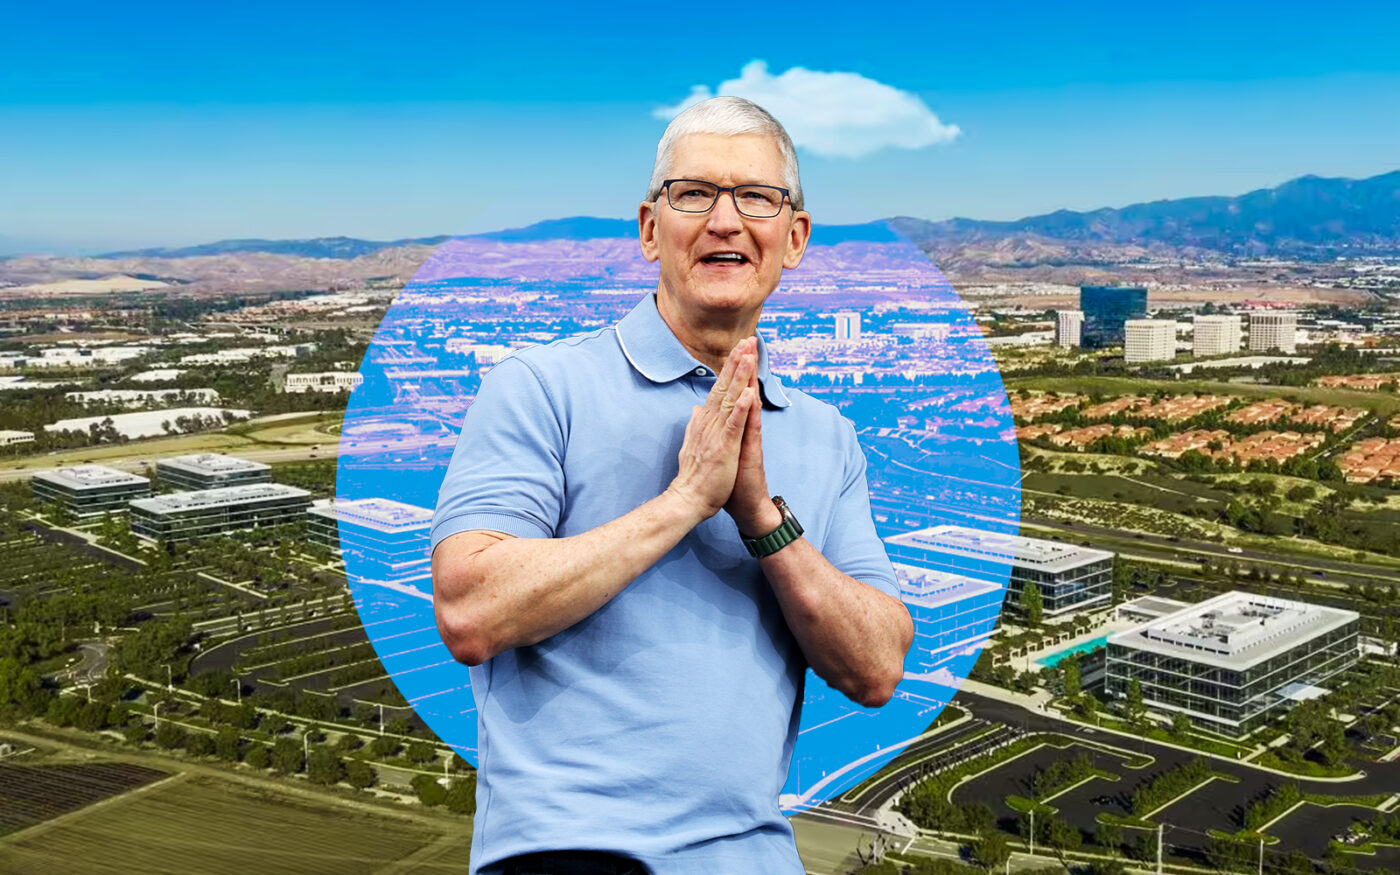 Apple's Tim Cook and 17800 Laguna Canyon Road in Irvine